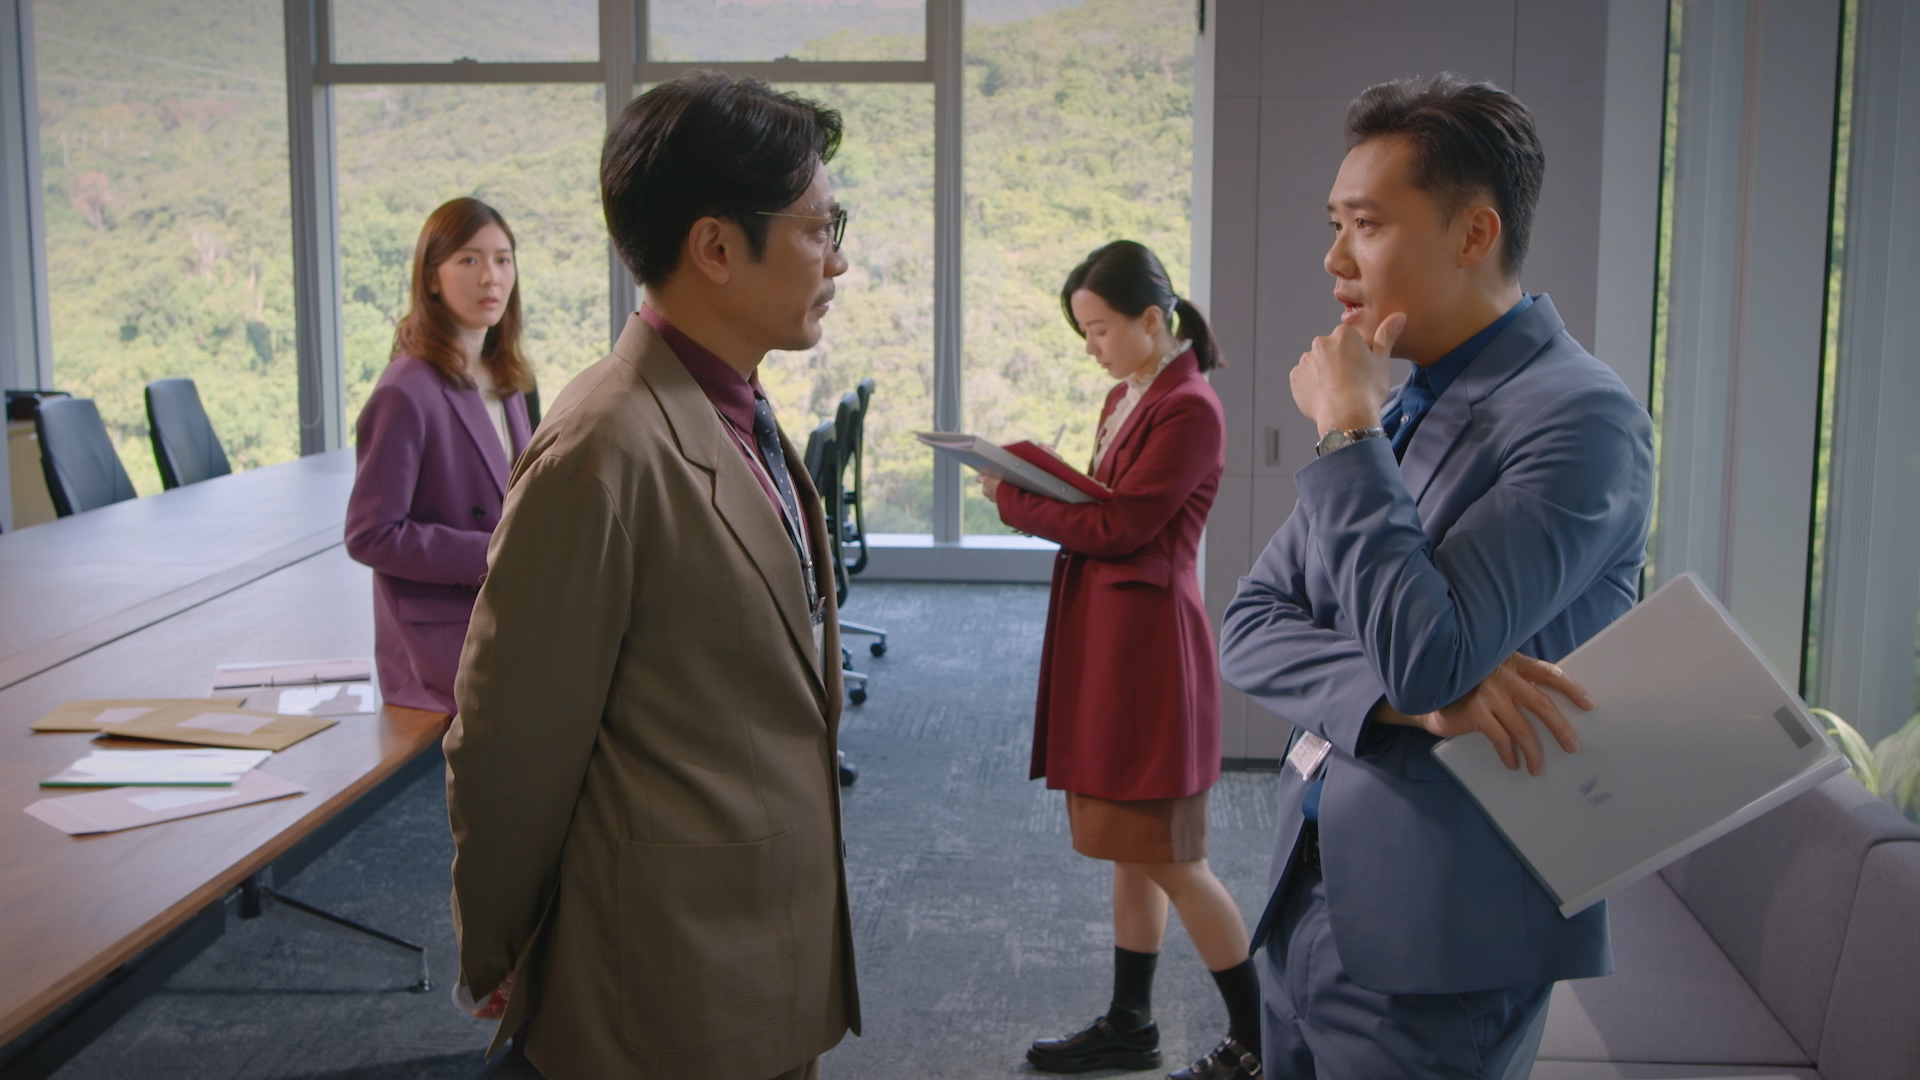 Johnny (played by Alan LUK) appoints Sean (played by Himmy WONG) as the officer-in-charge of the operation, and that upsets Ashley (played by Jennifer YU), who is of the same rank as Sean.